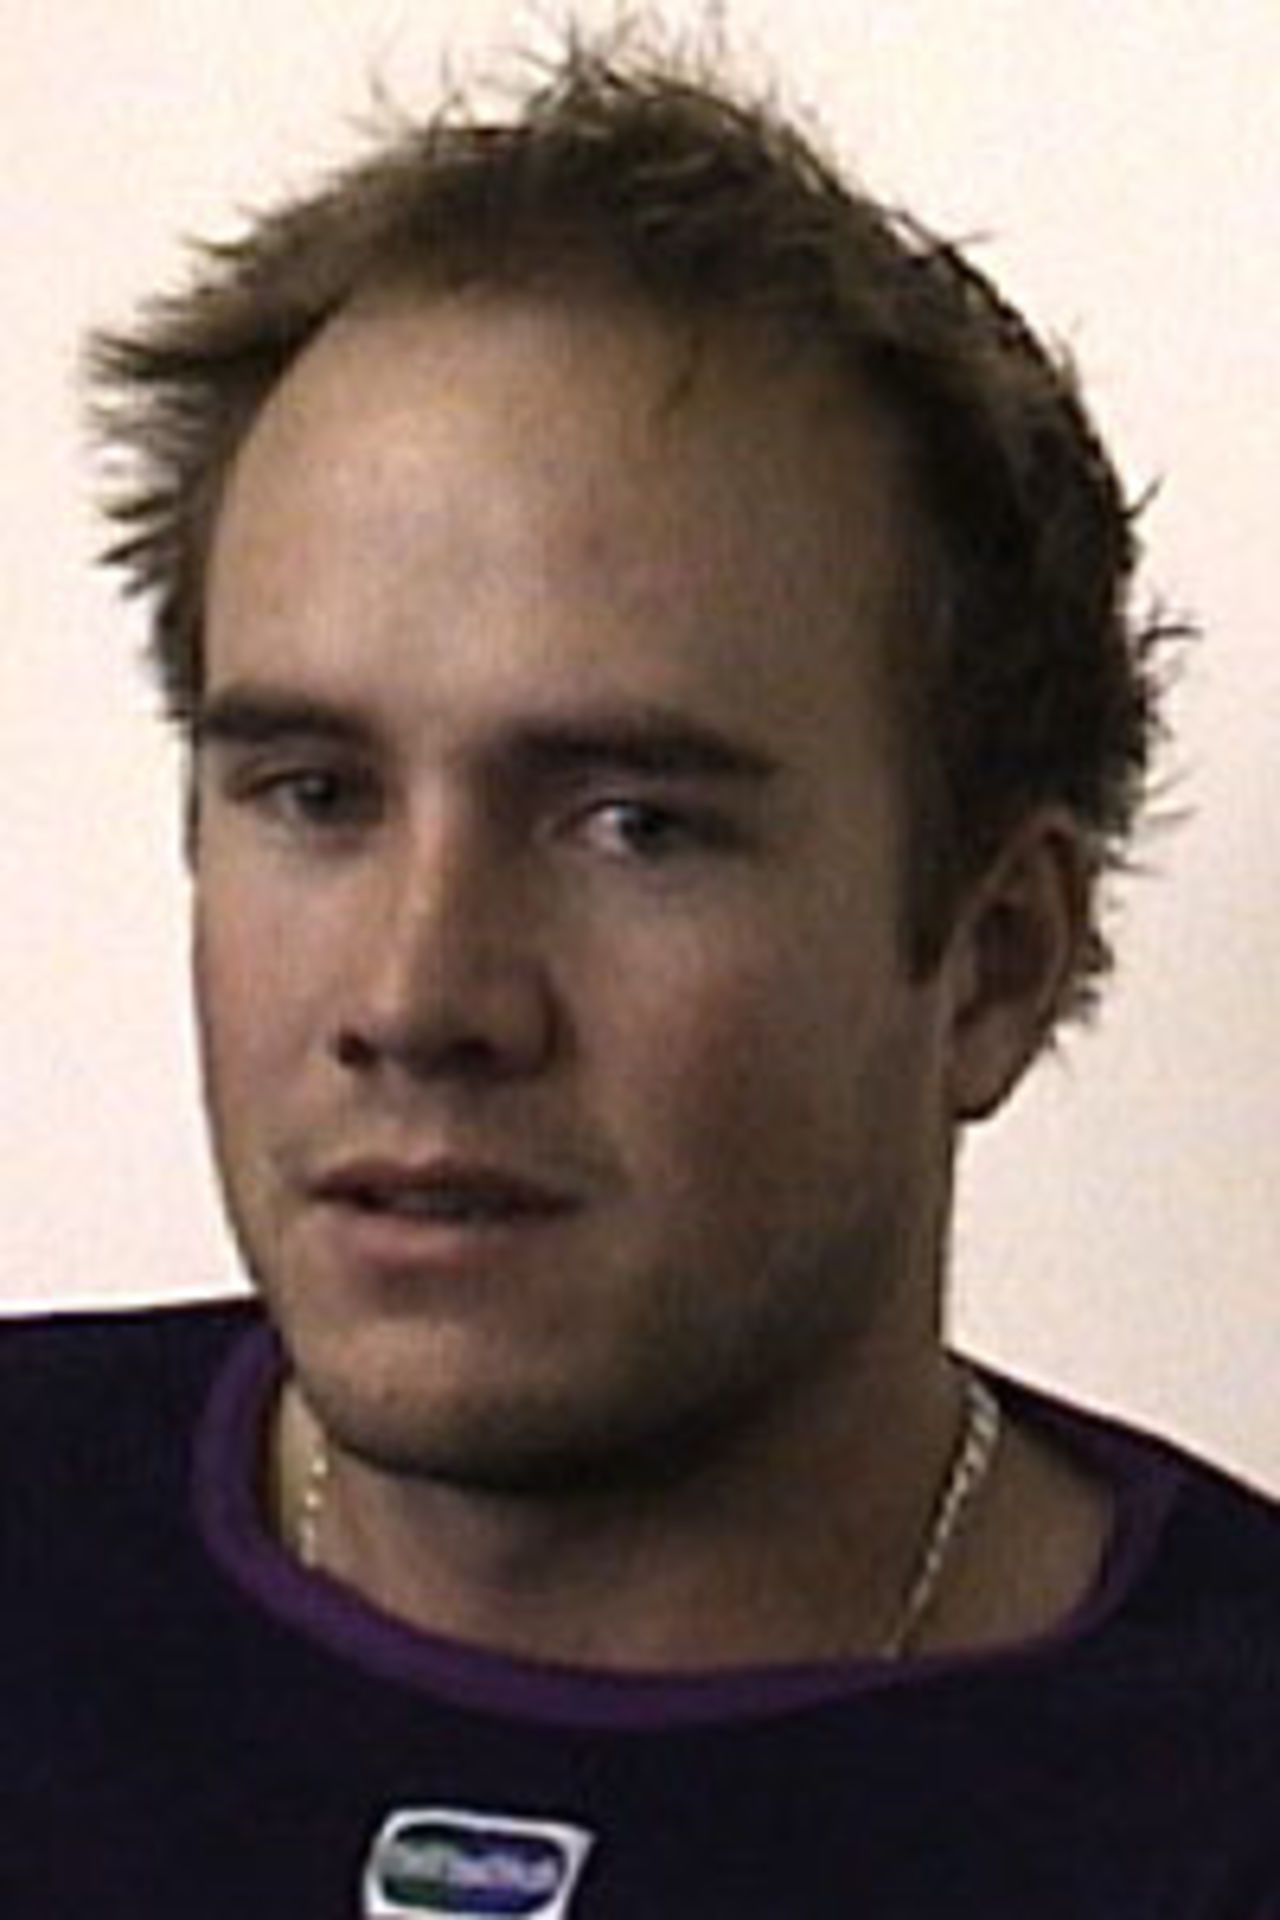 Portrait of Peter Fulton, Canterbury player during the 2002/03 season.